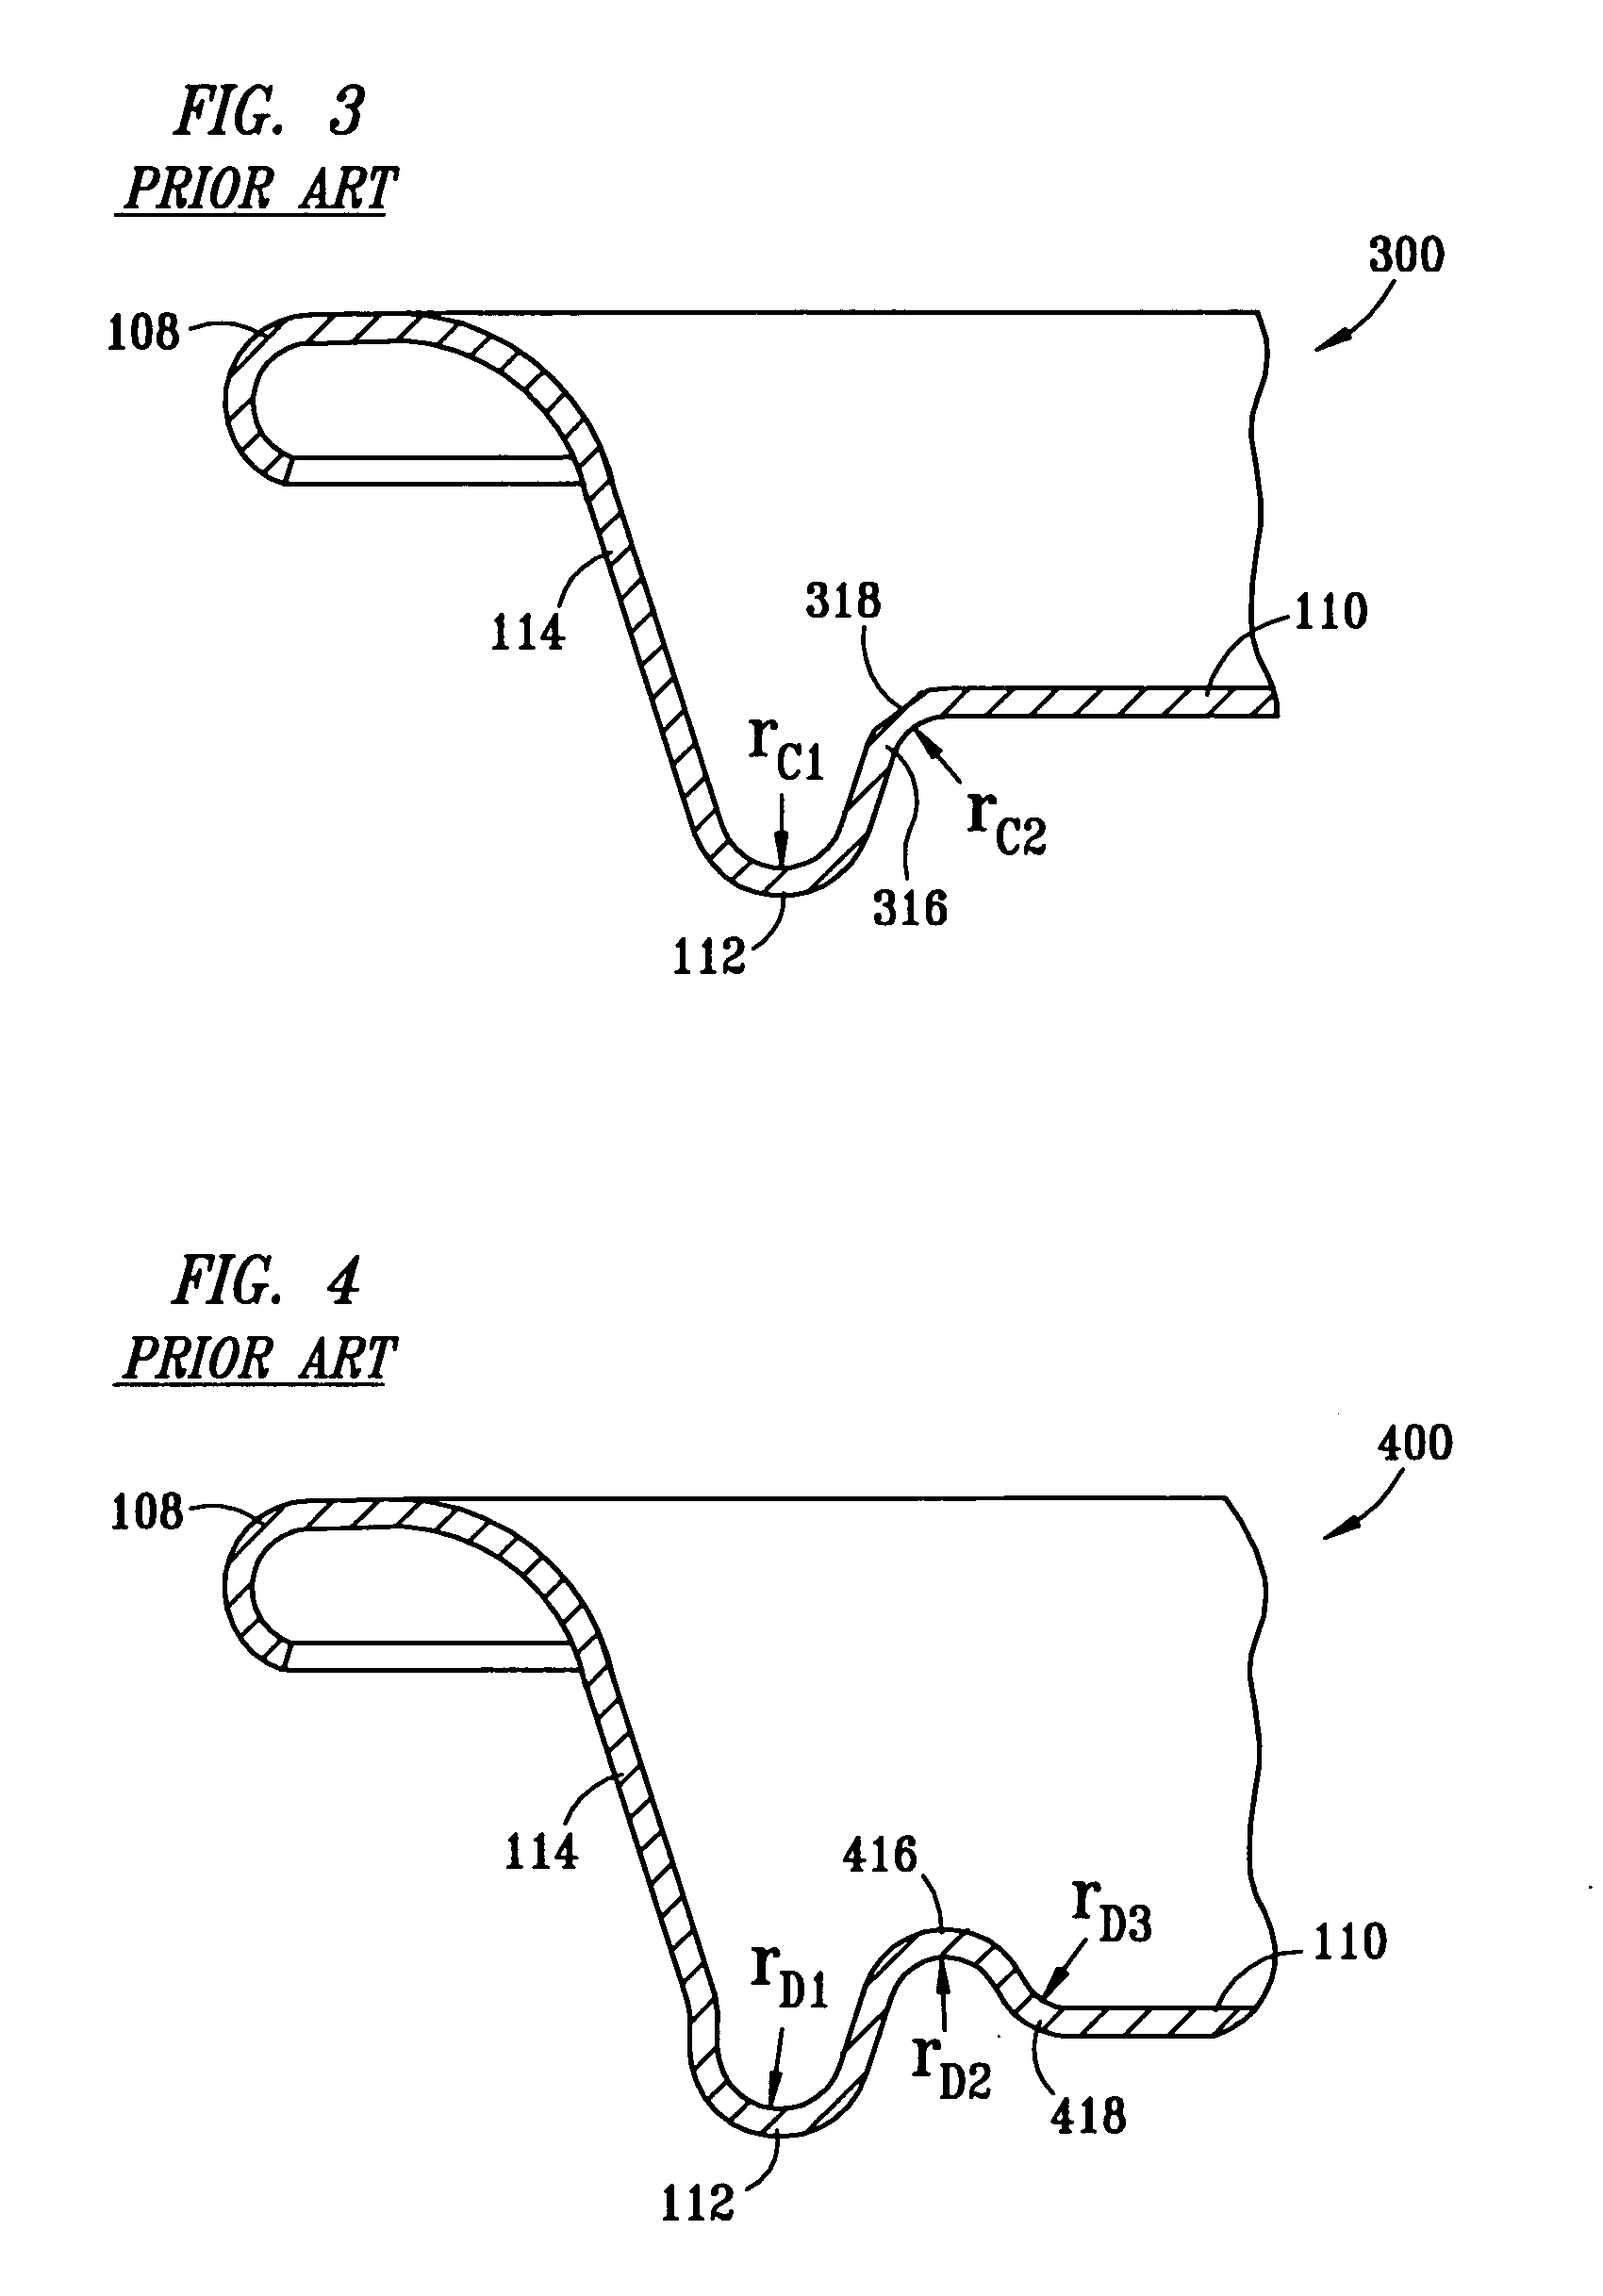 Can lid closure and method of joining a can lid closure to a can body